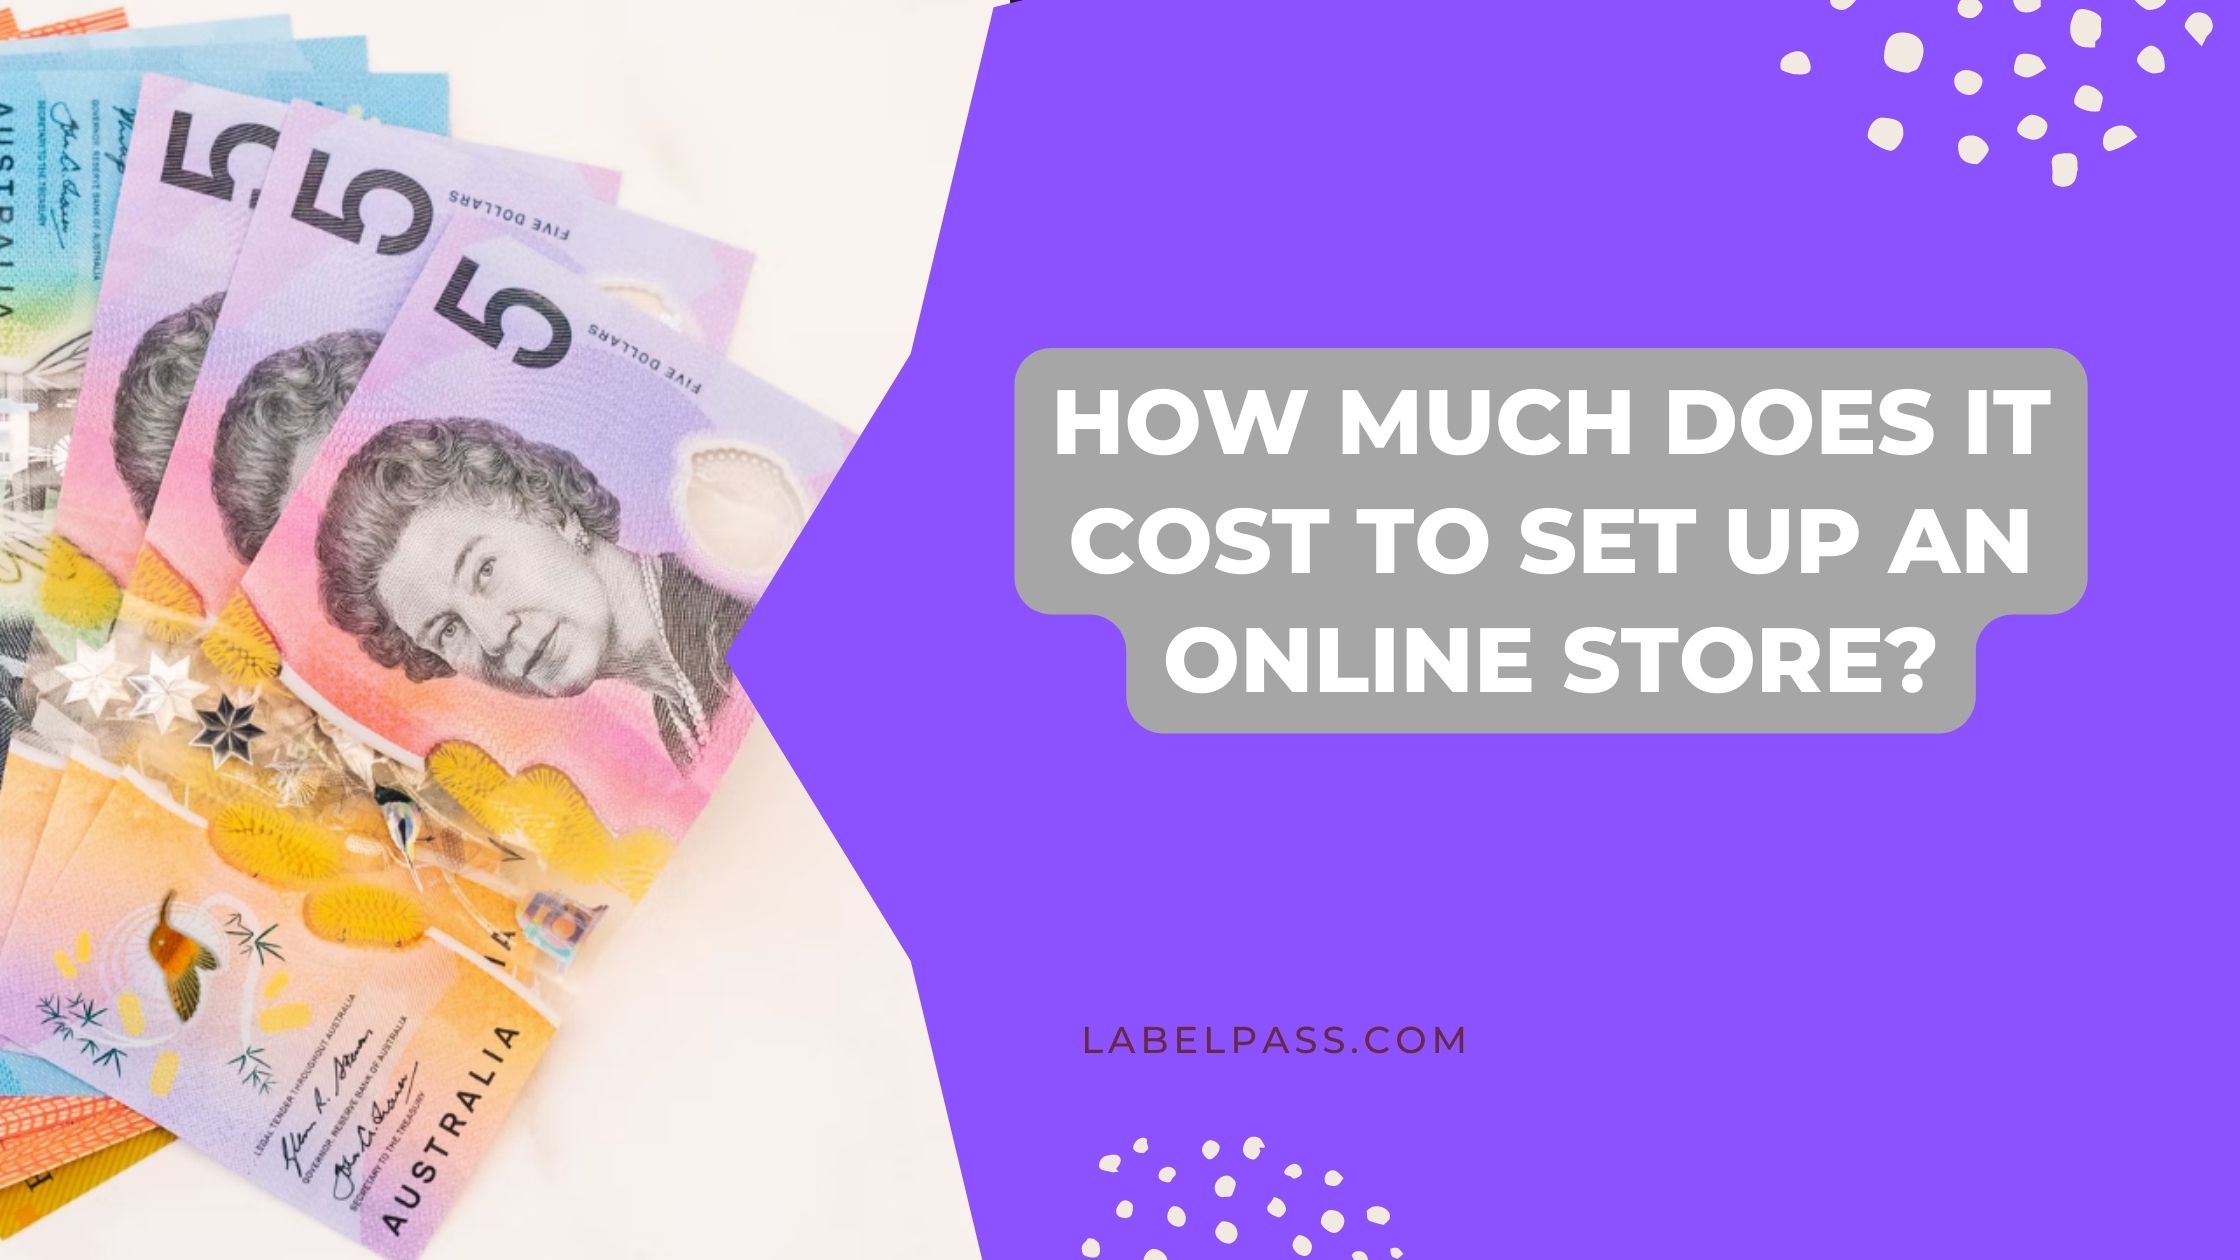 How Much Does It Cost To Set Up An Online Store?